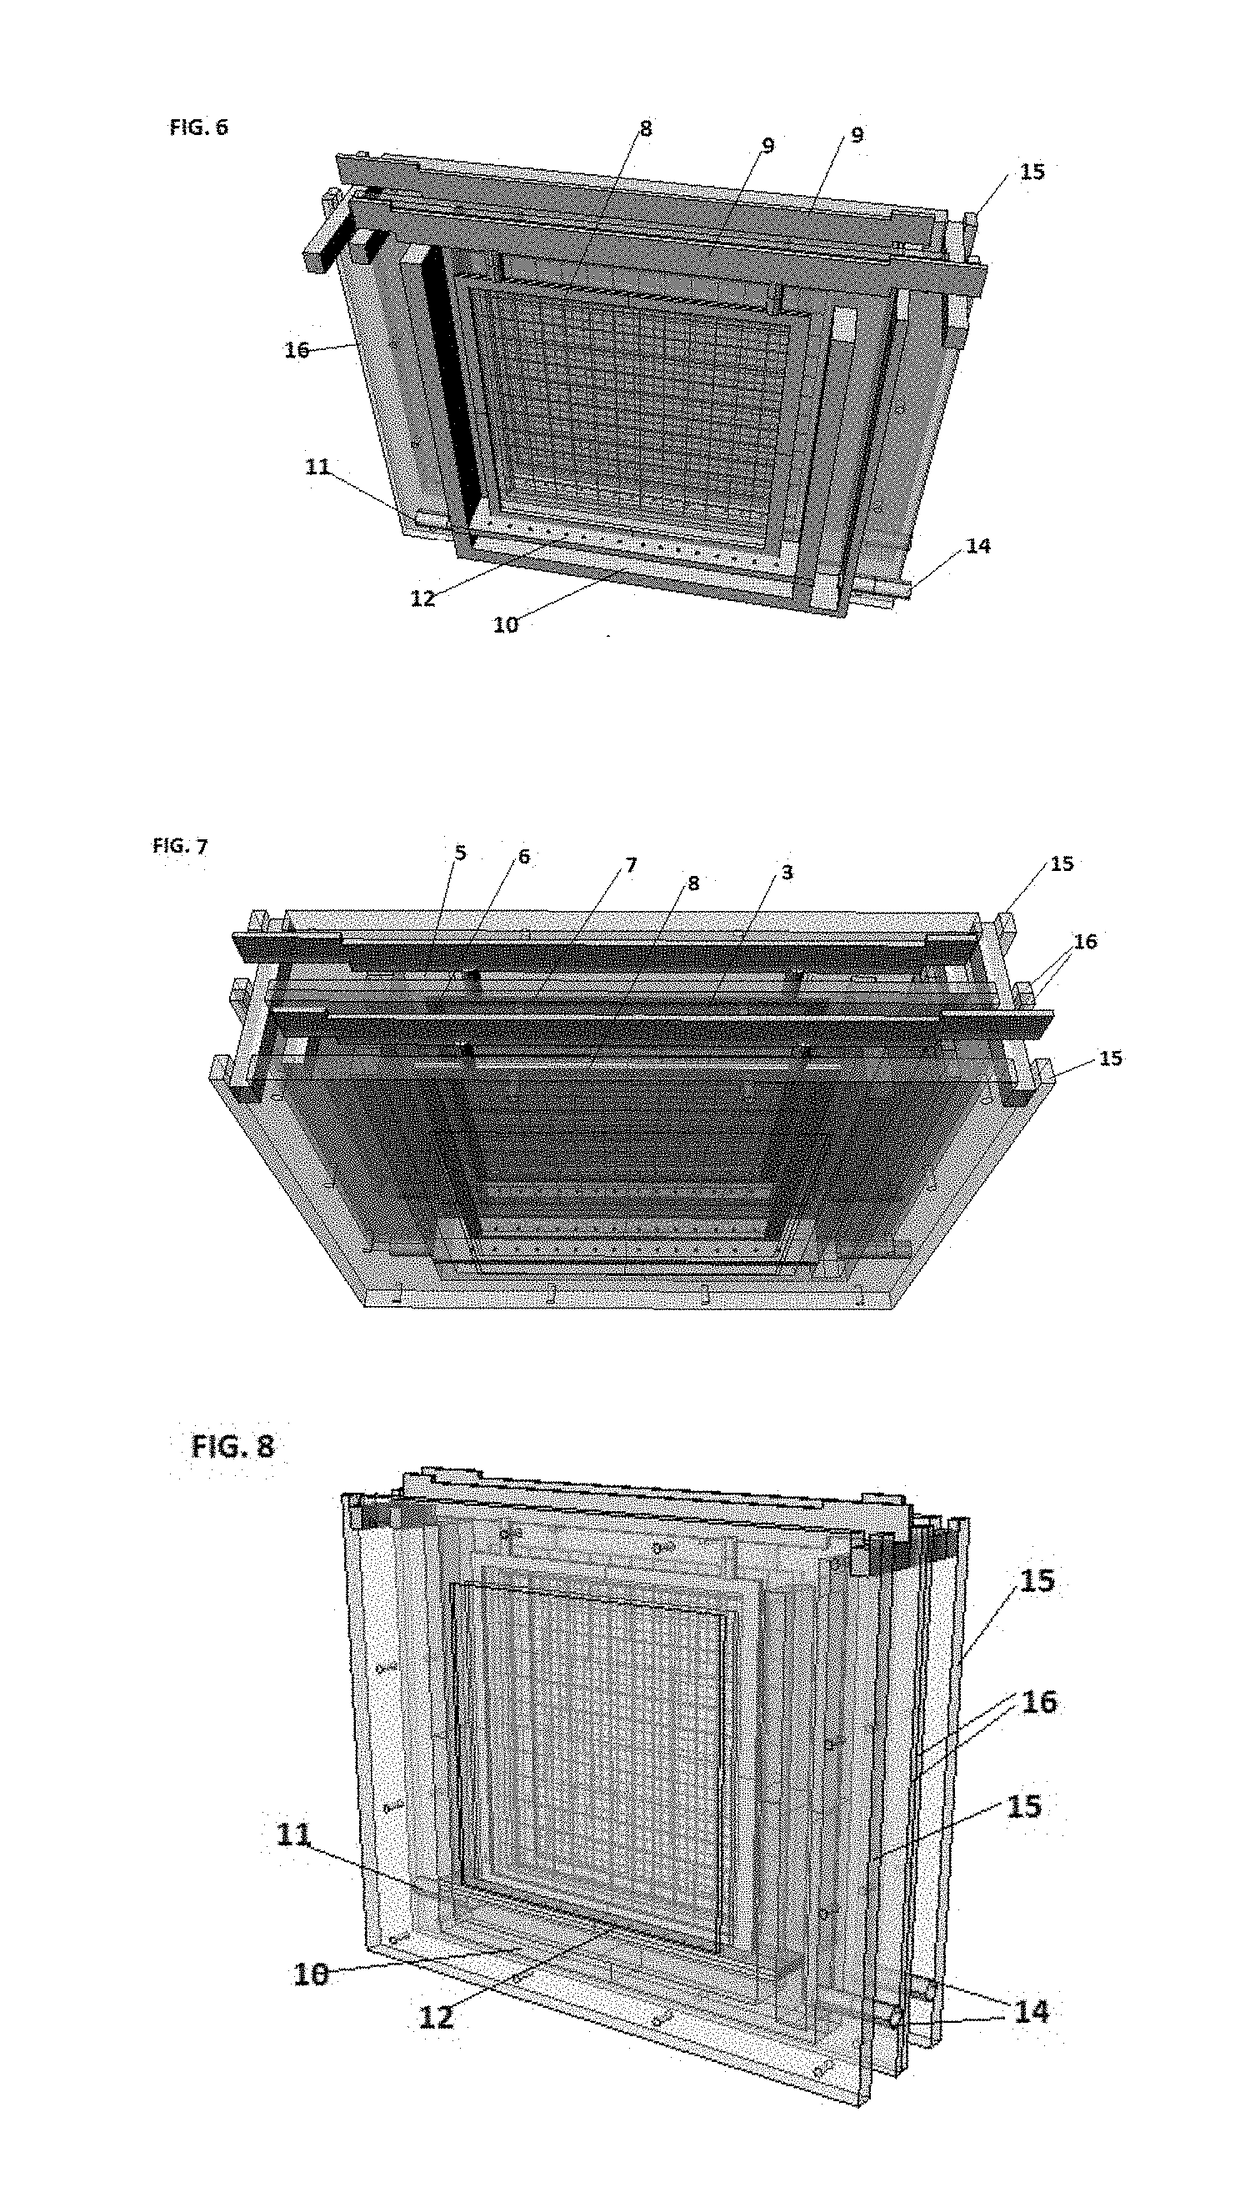 Multipurpose electrolytic device (MPED) for forced or spontaneous electrolytic processes, with independent electrolytes